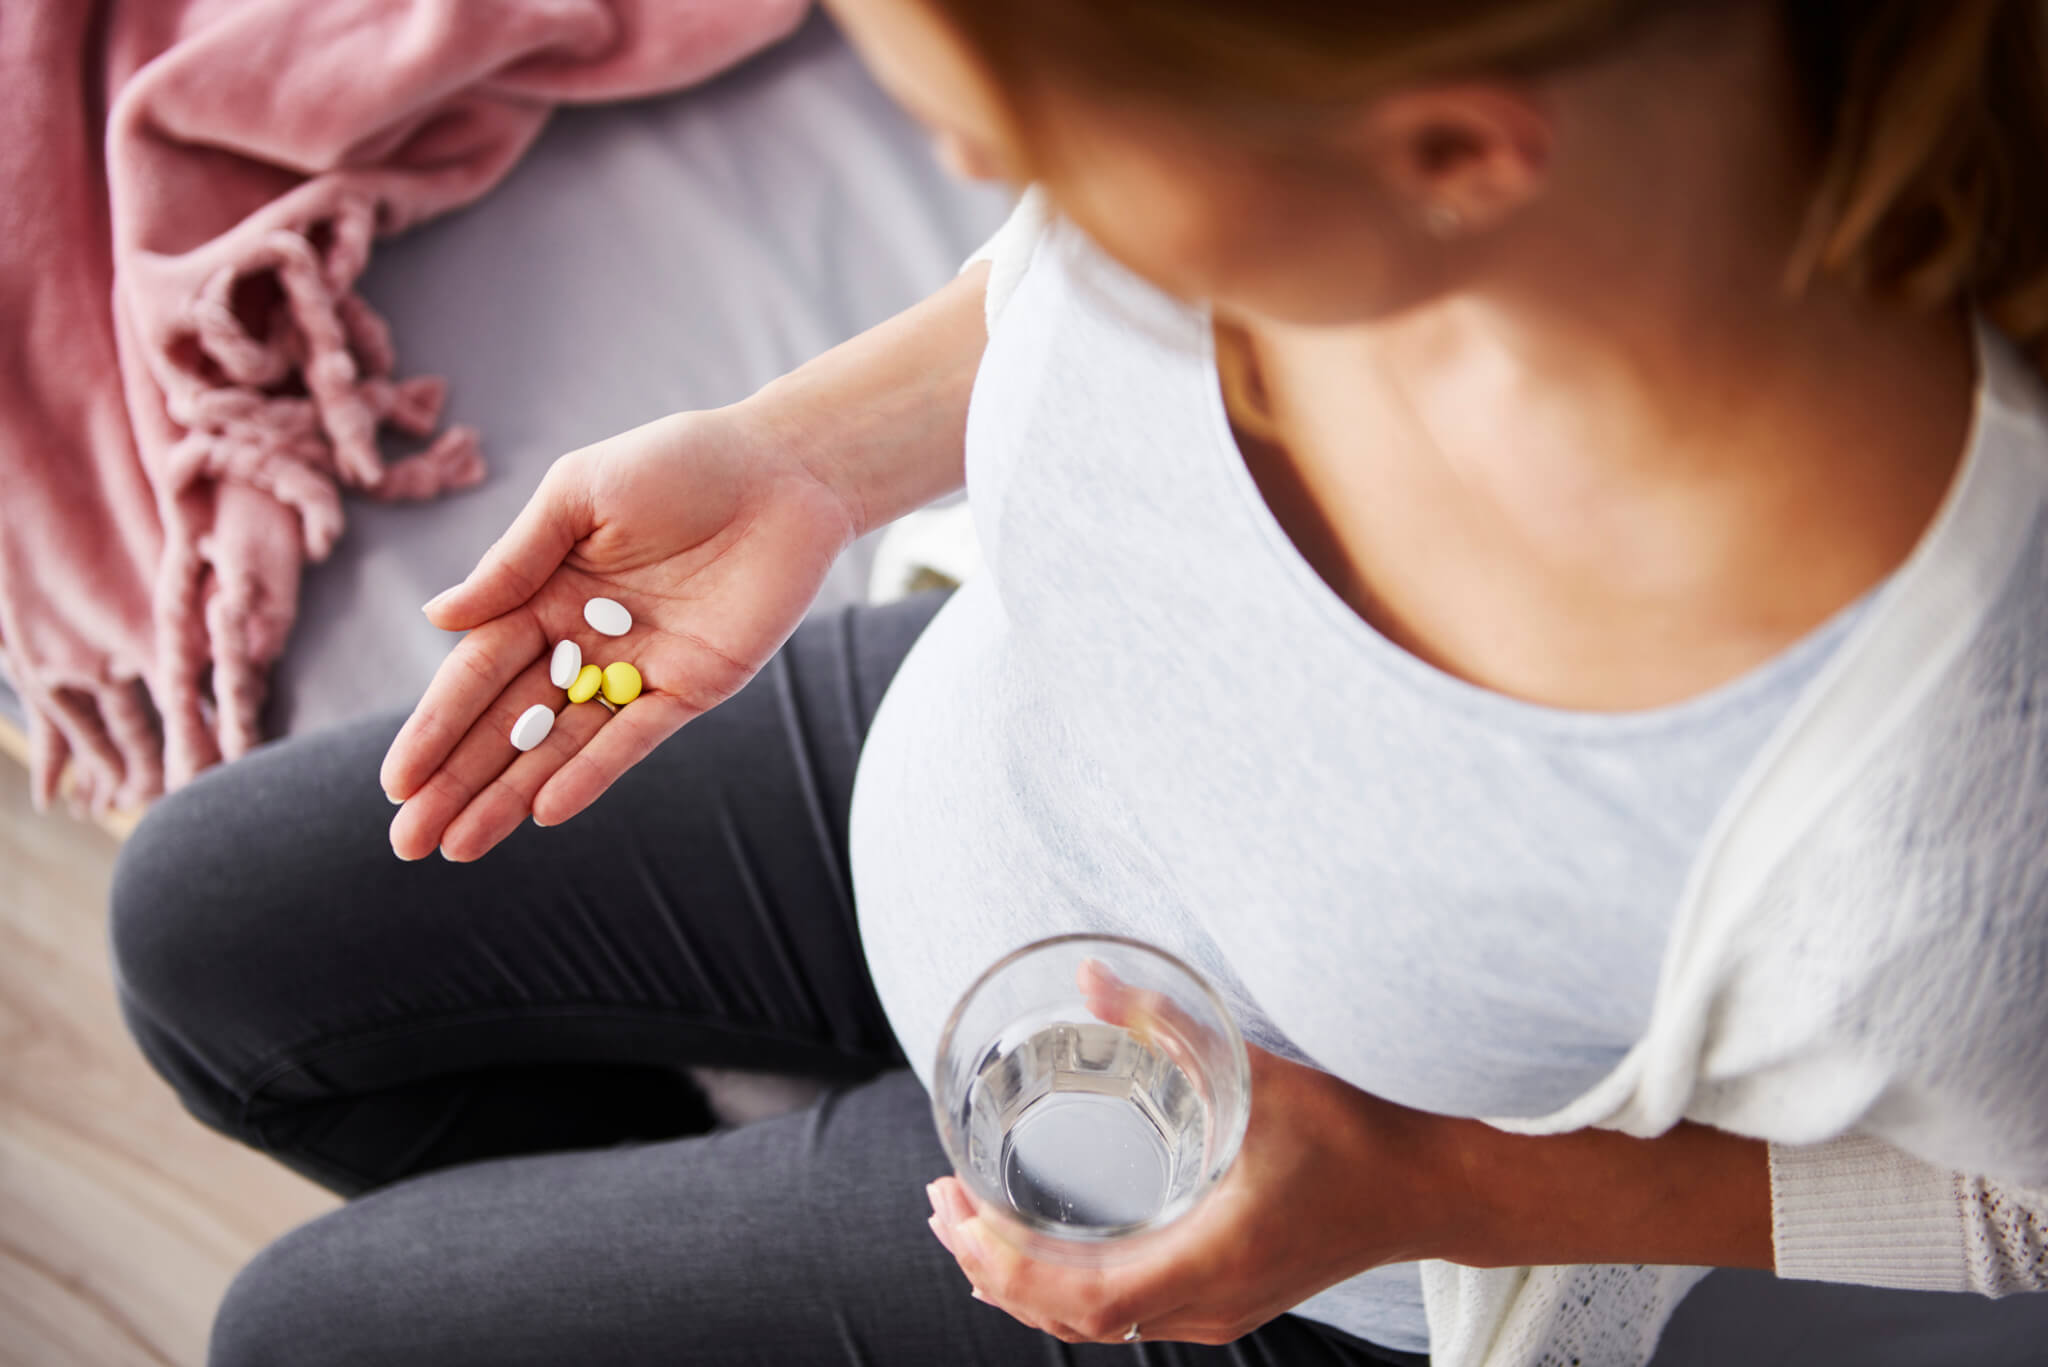 Young pregnant woman taking medicine